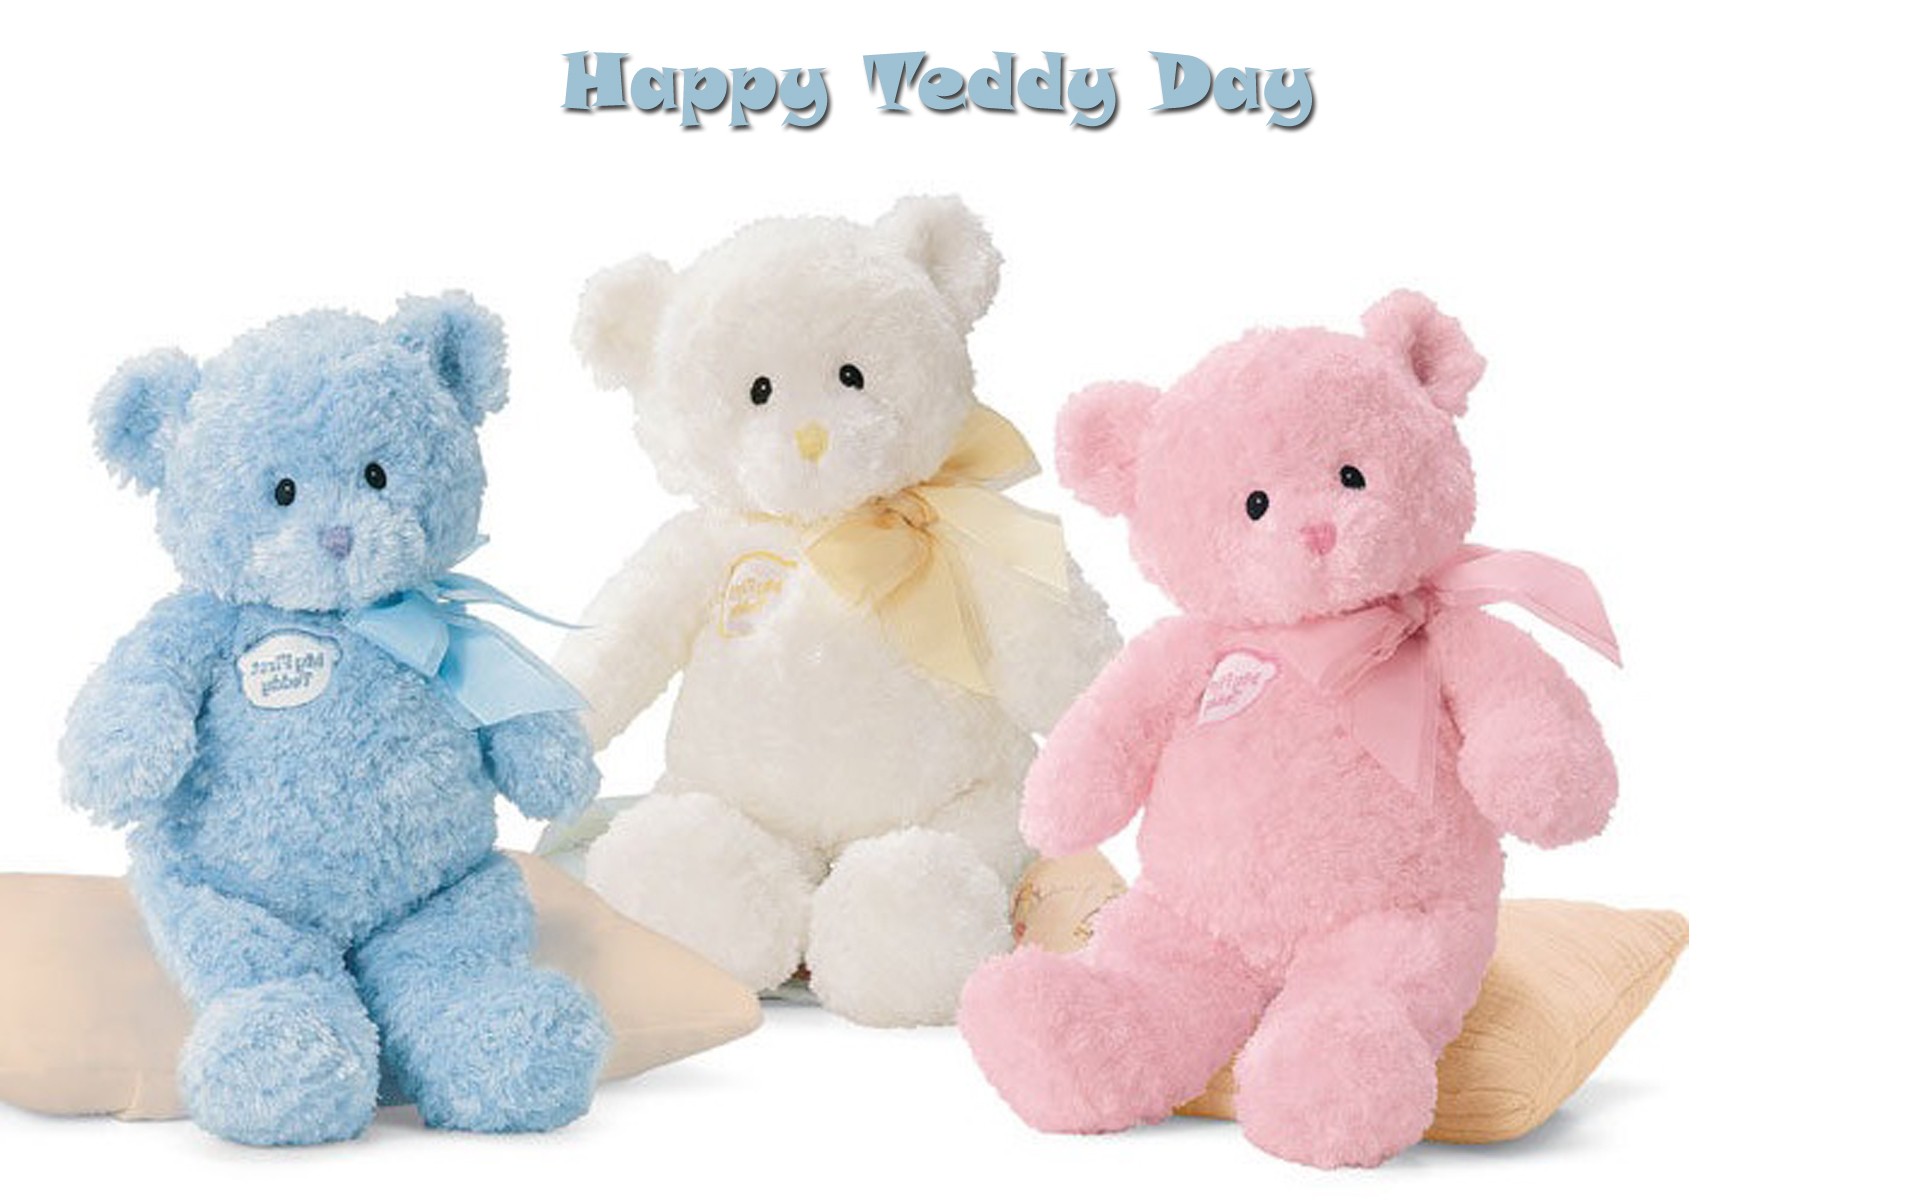 happy teddy bear day pics collection 